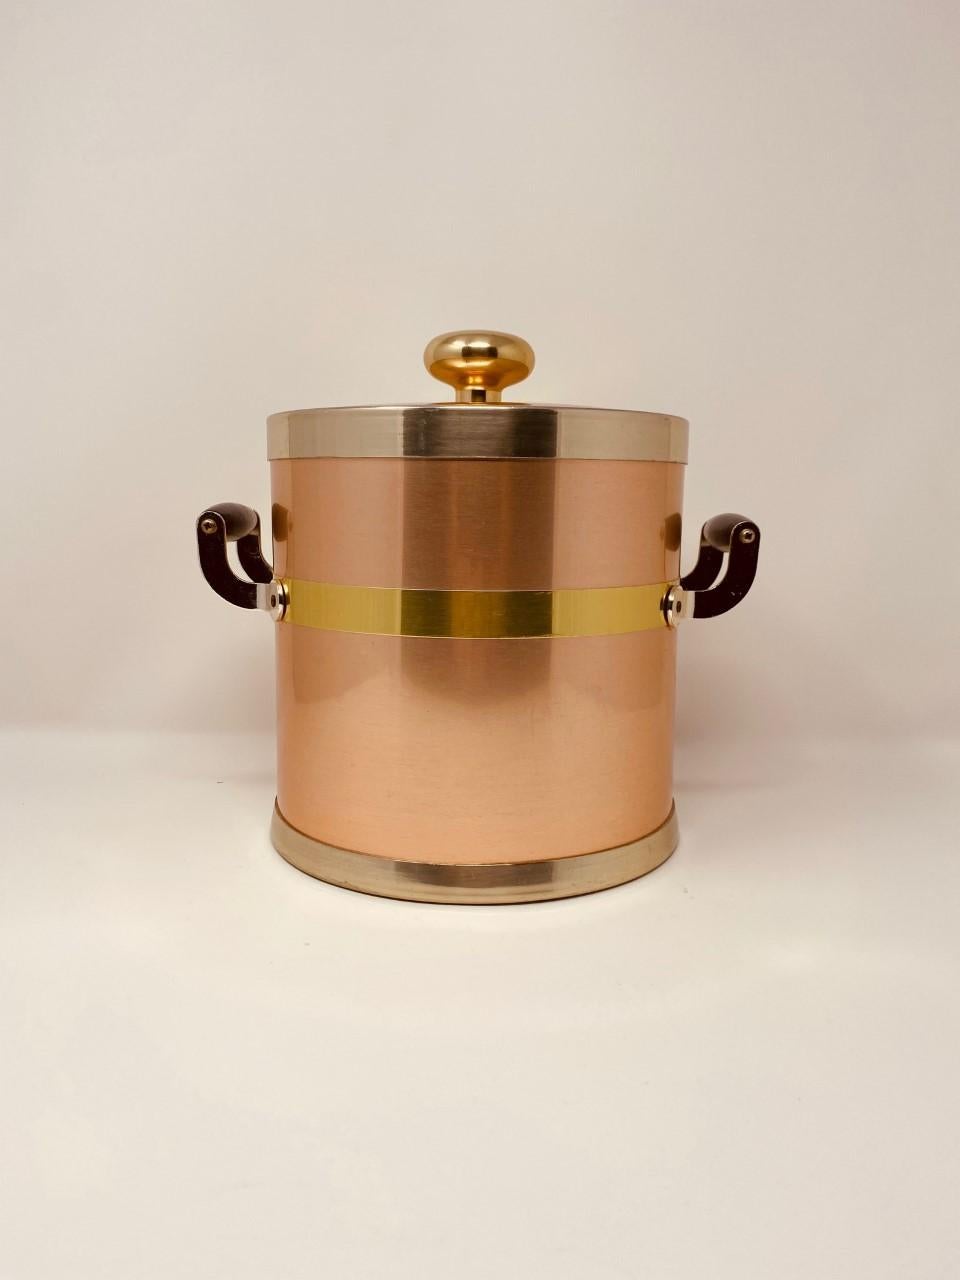 Glamorous and elegant vintage copper ice bucket. This 1950s beautiful midcentury piece is rare and special because of its color that hints on a rose tone of copper. The piece is streamlined and is accented with gold metal edges and dark wood handles